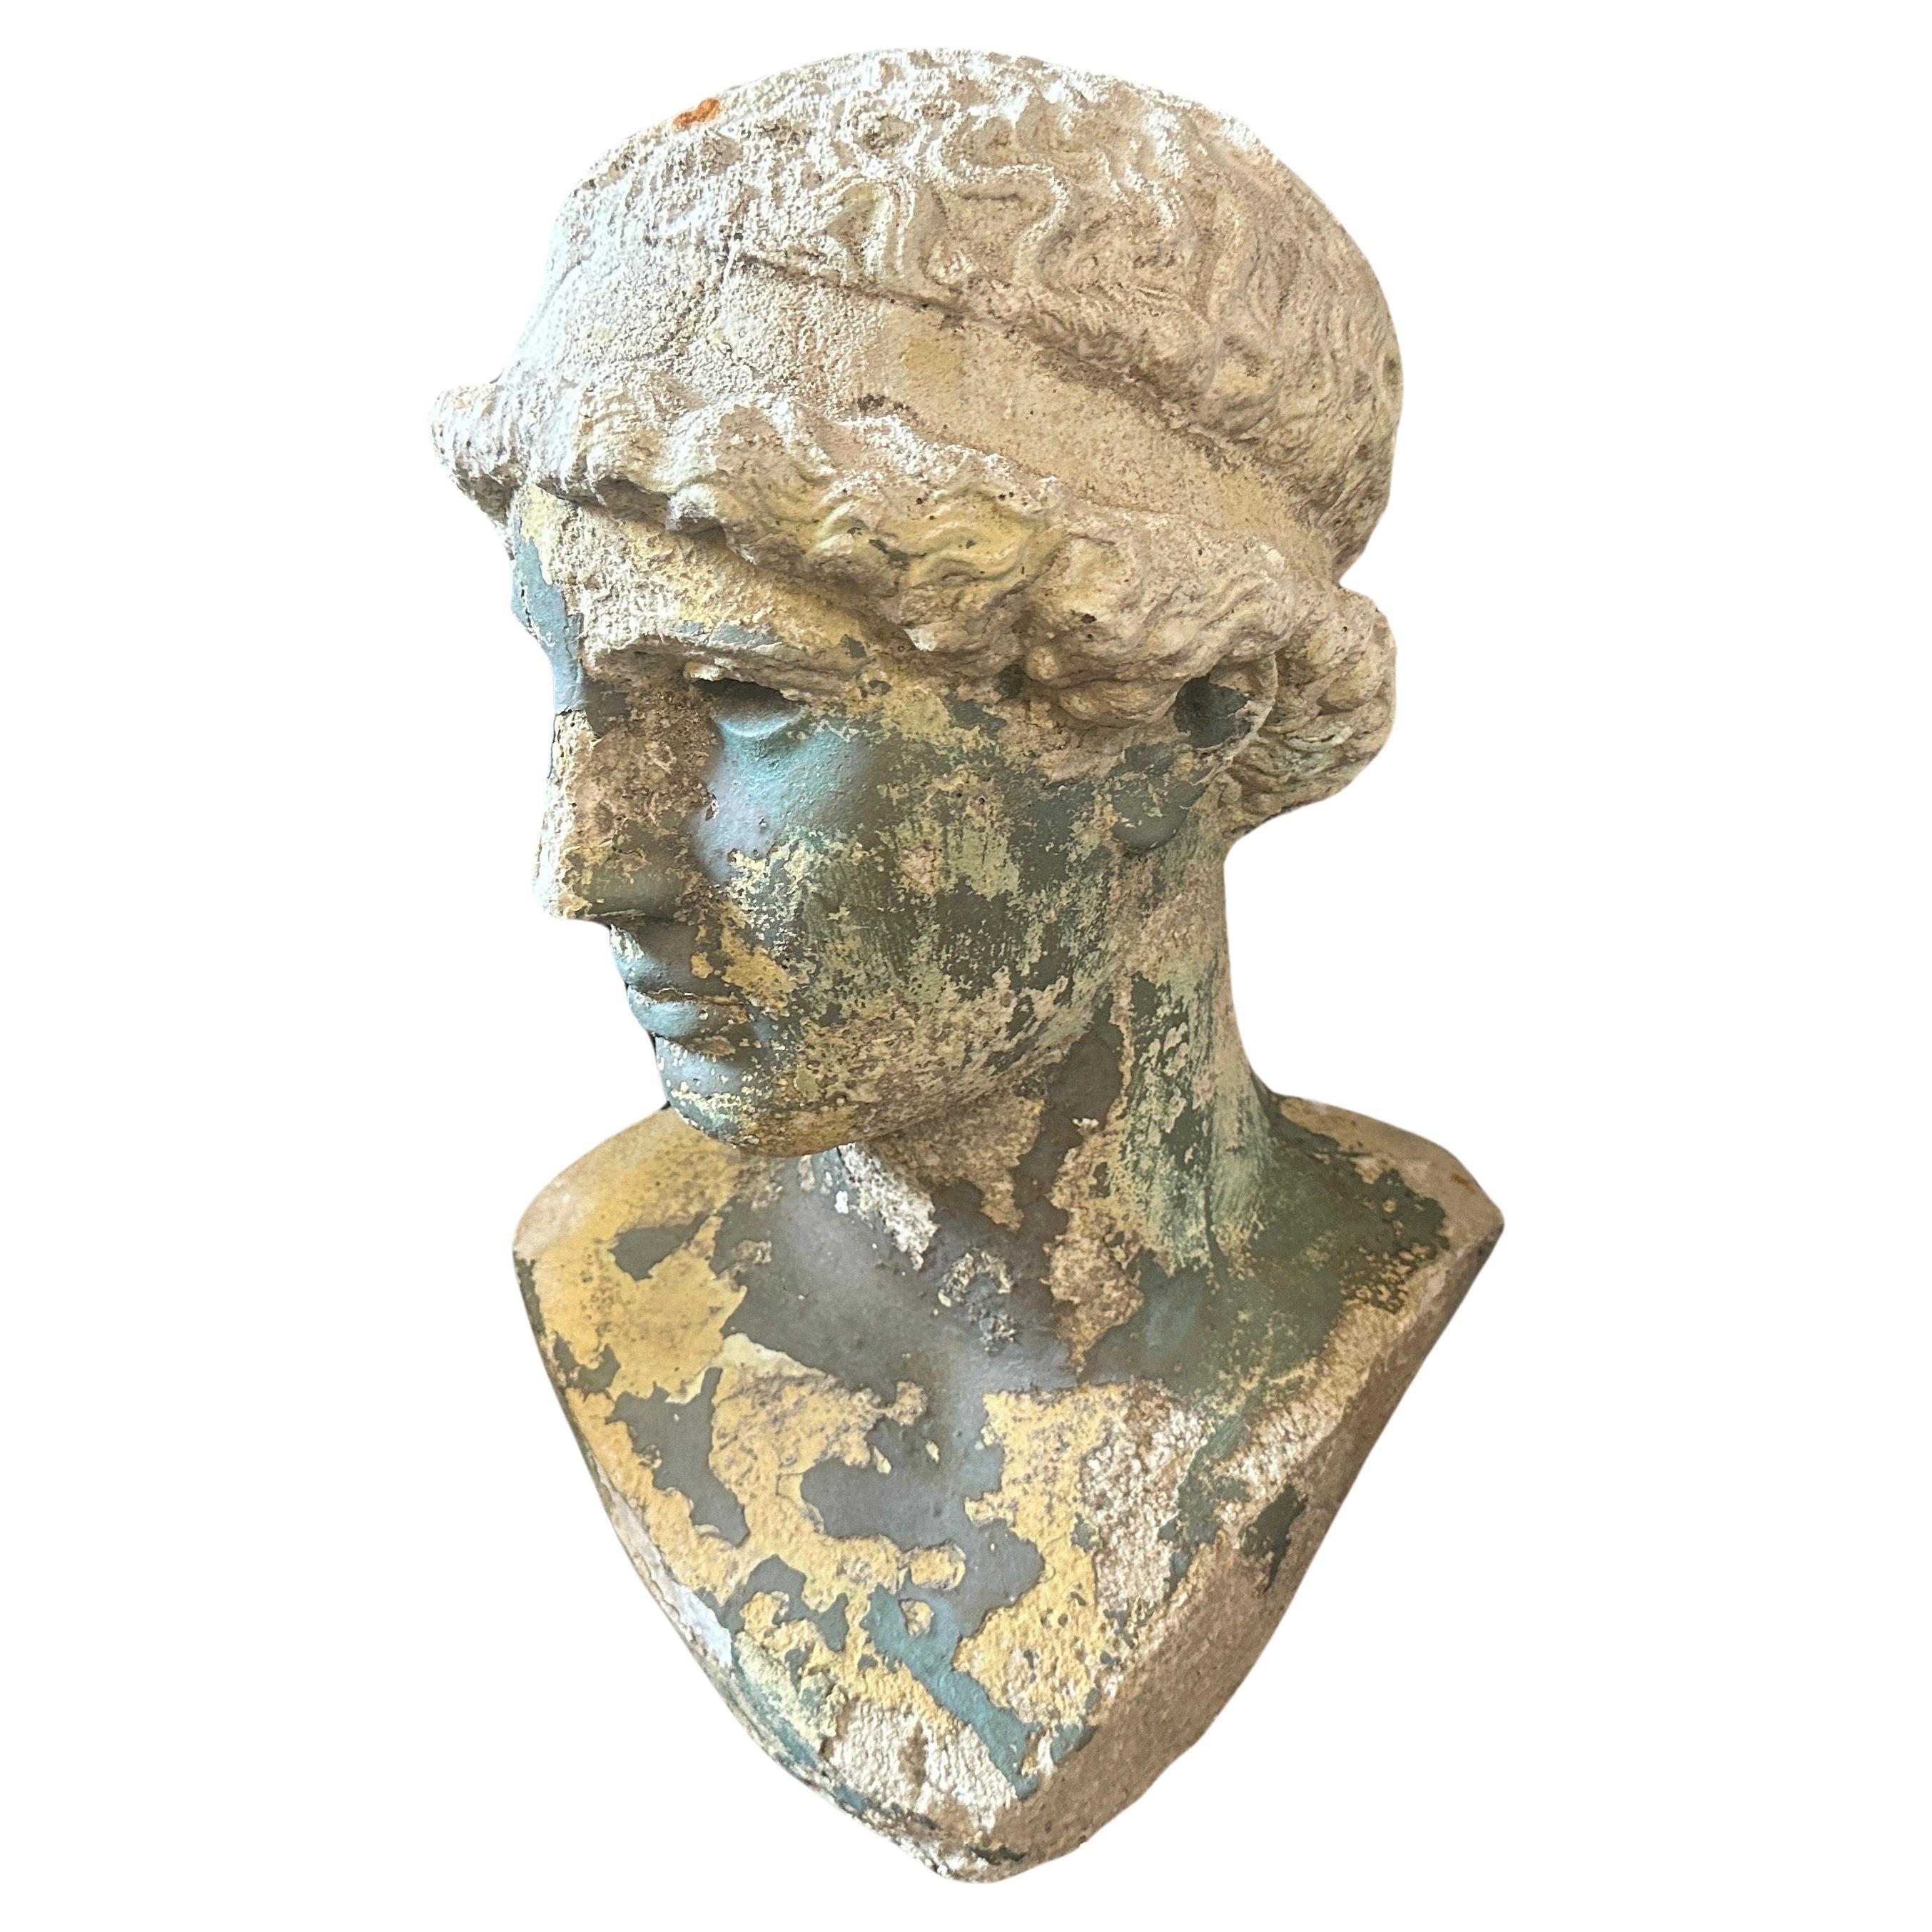 An Italian plaster bust of Minerva with characteristics typical of the Neoclassical style that emerged in the late 18th century and continued into the 19th century. The bust typically made from plaster, a common material for Neoclassical sculptures